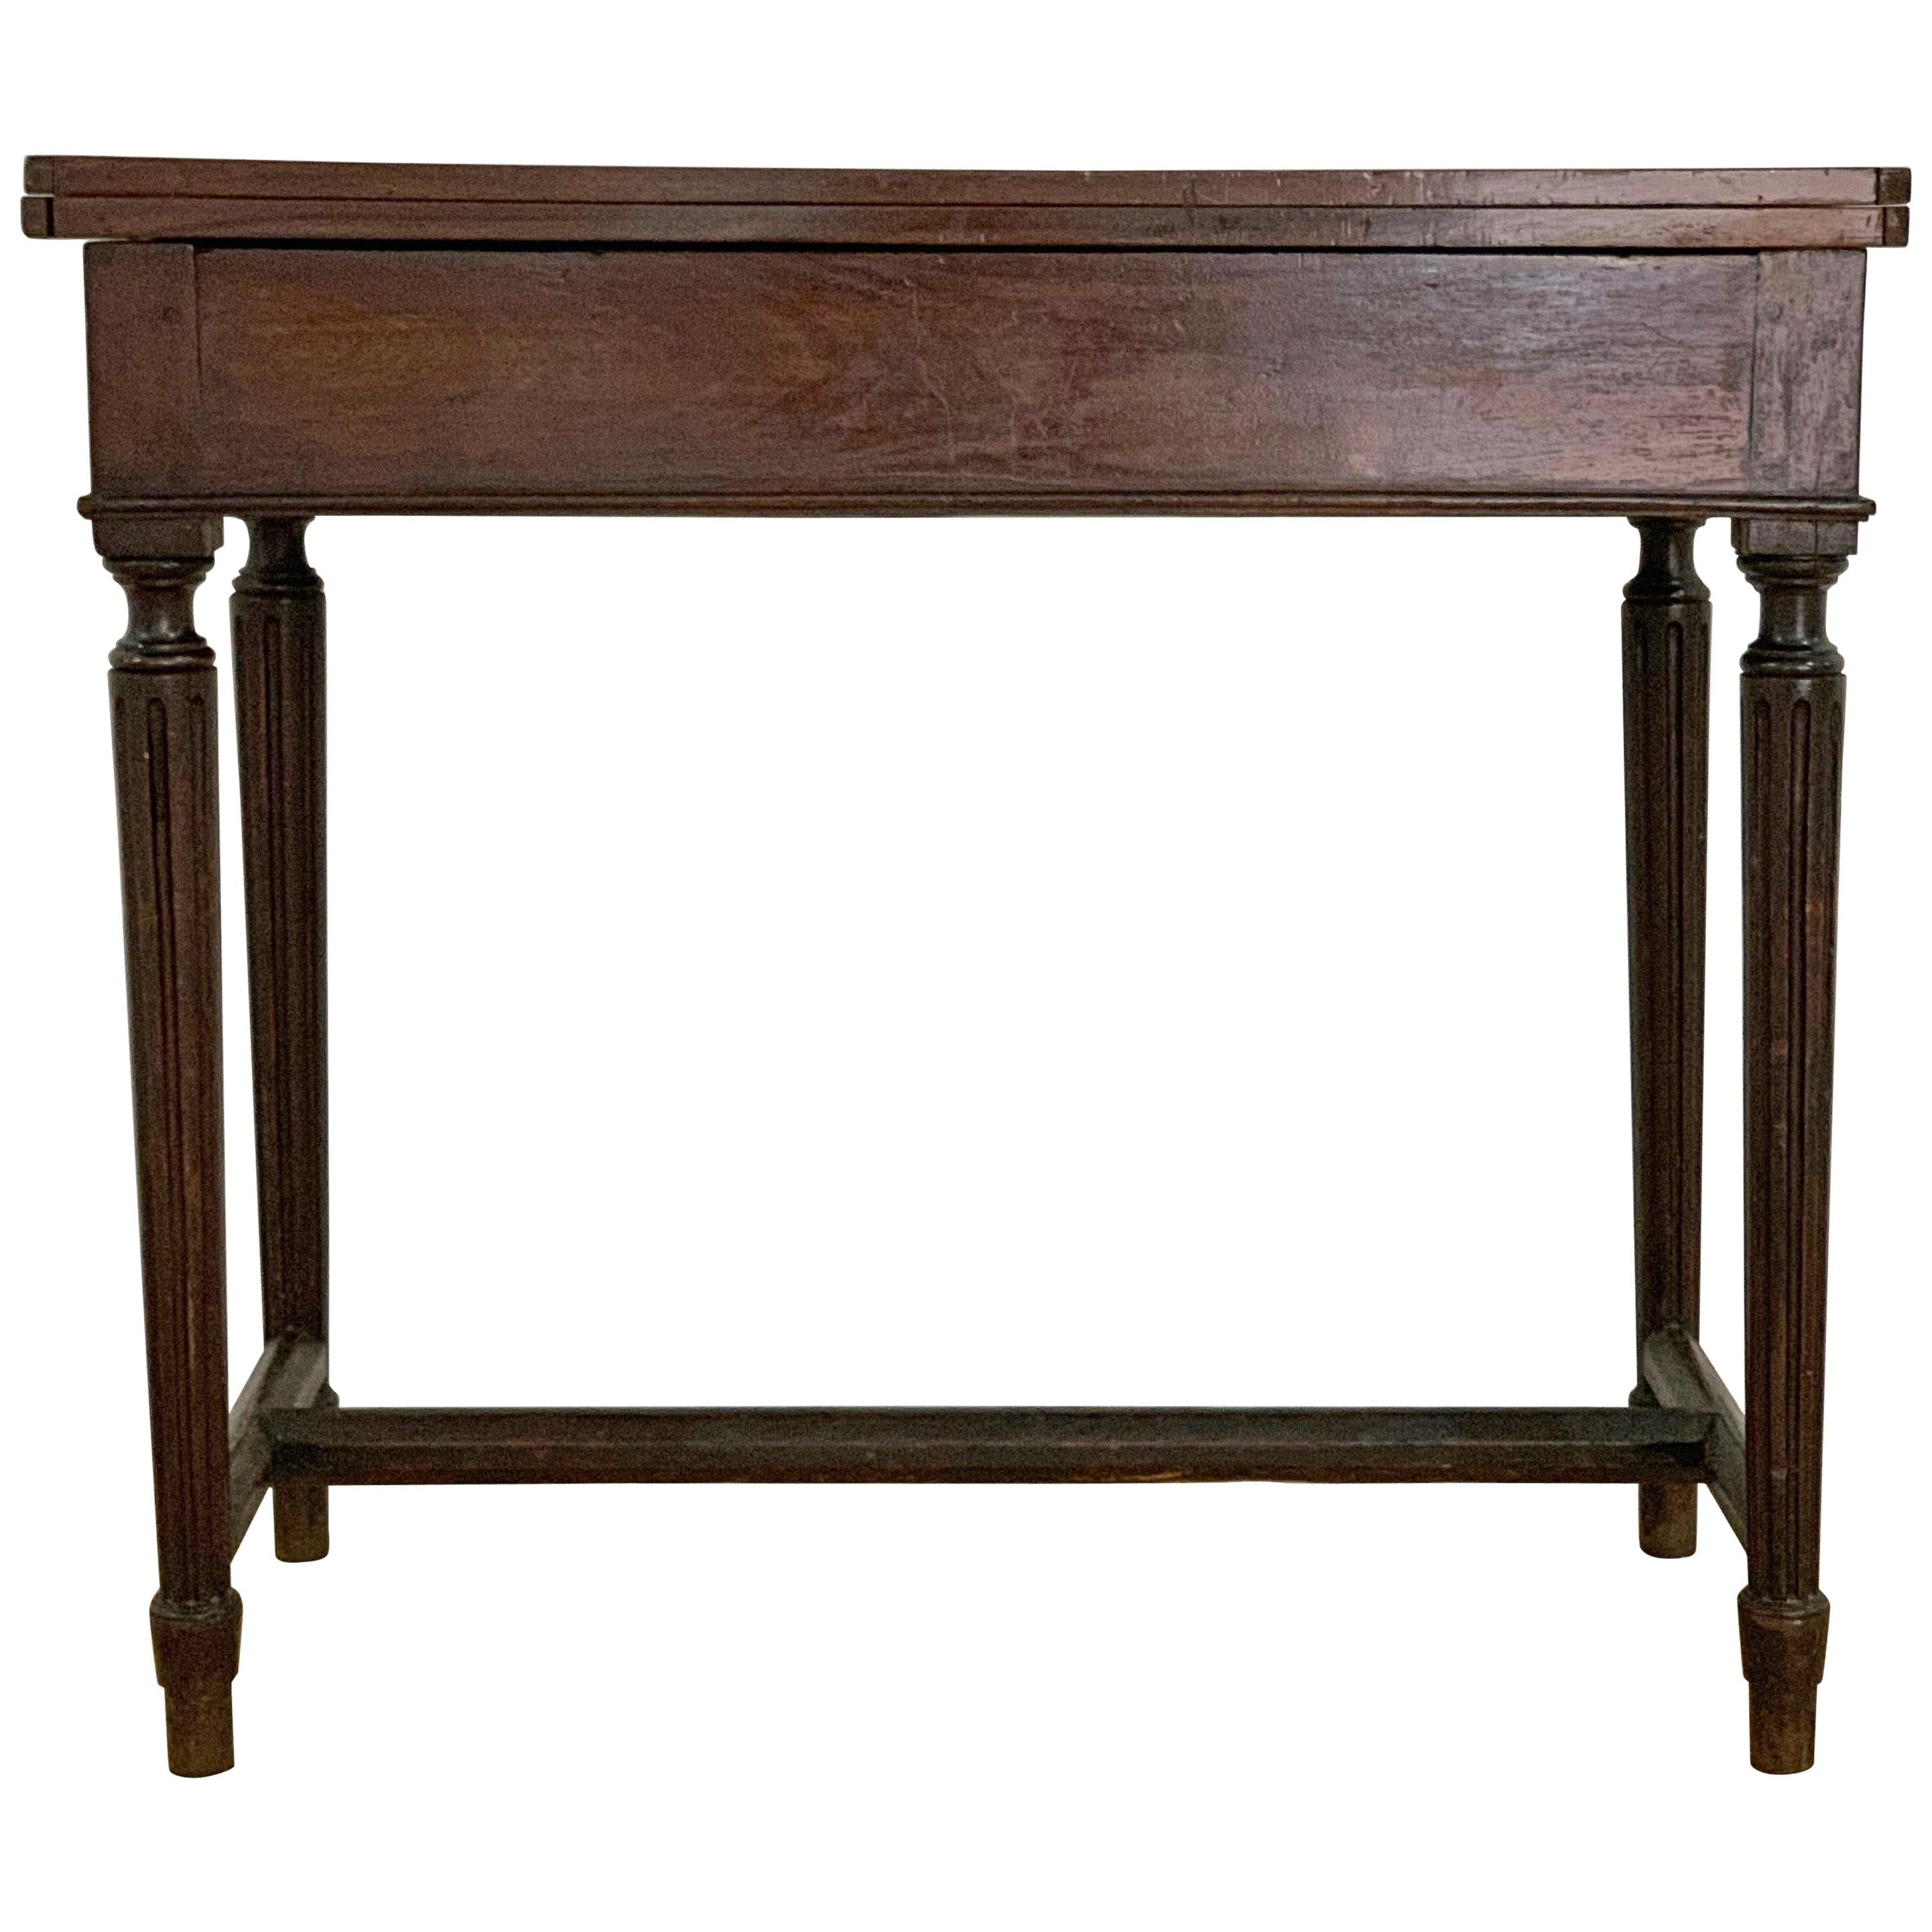 19th Century French Fold over Mahogany Games or Tea Table